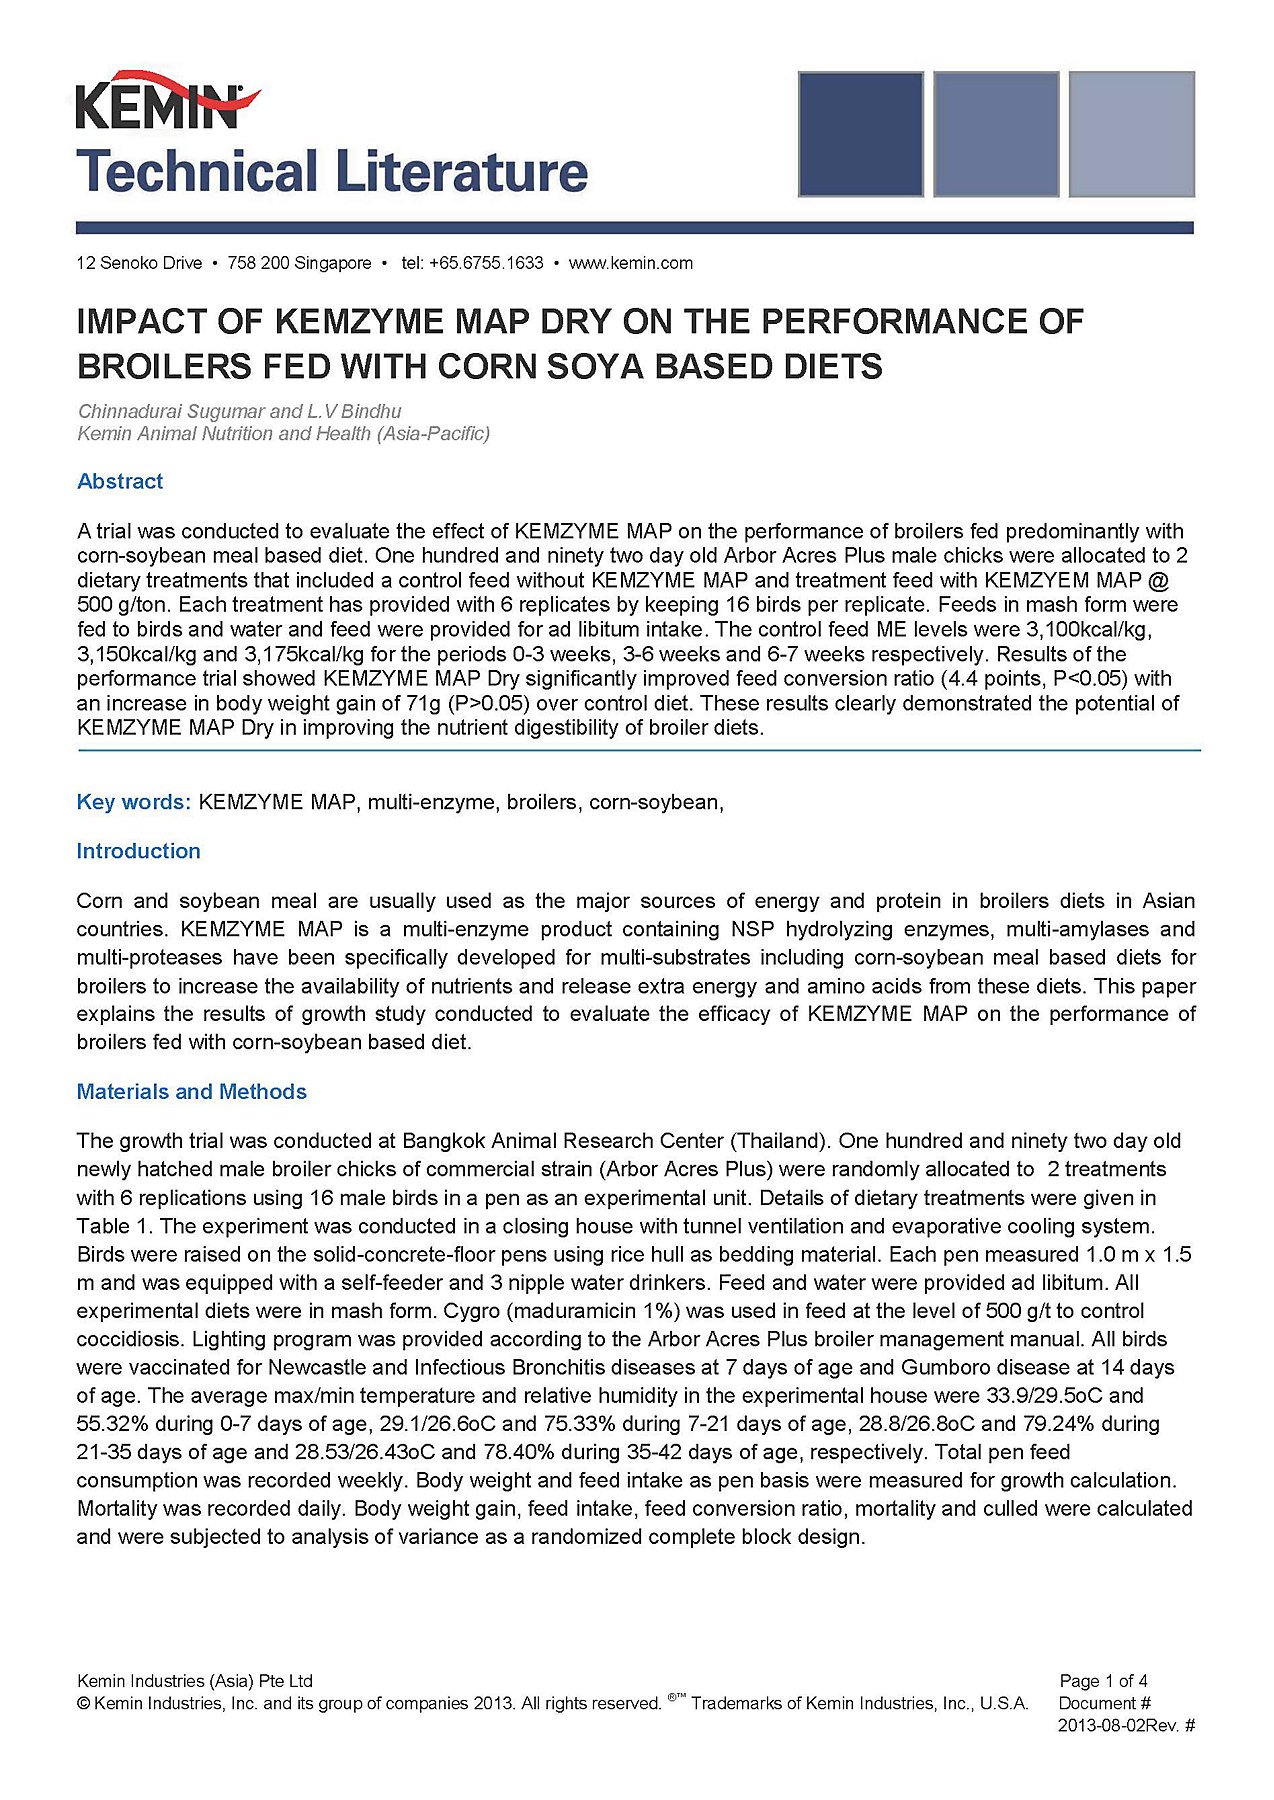 16_July_tl-13-00042_impact_of_kemzyme_map_on_the_performance_of_broilers_fed_with_corn-soya_based__Page_1